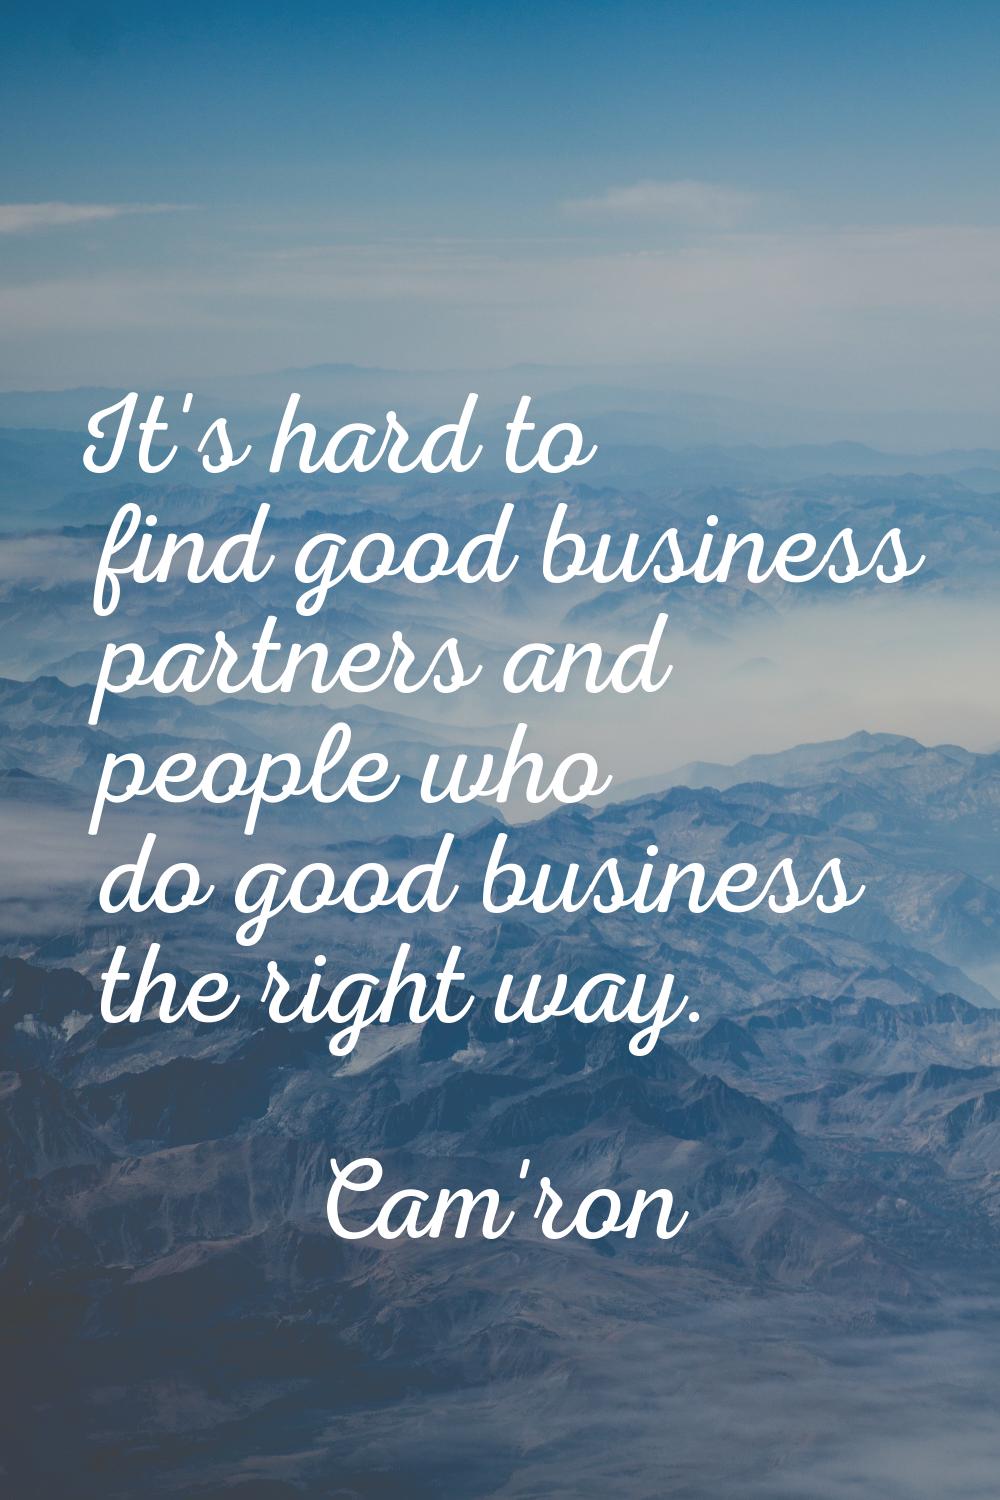 It's hard to find good business partners and people who do good business the right way.